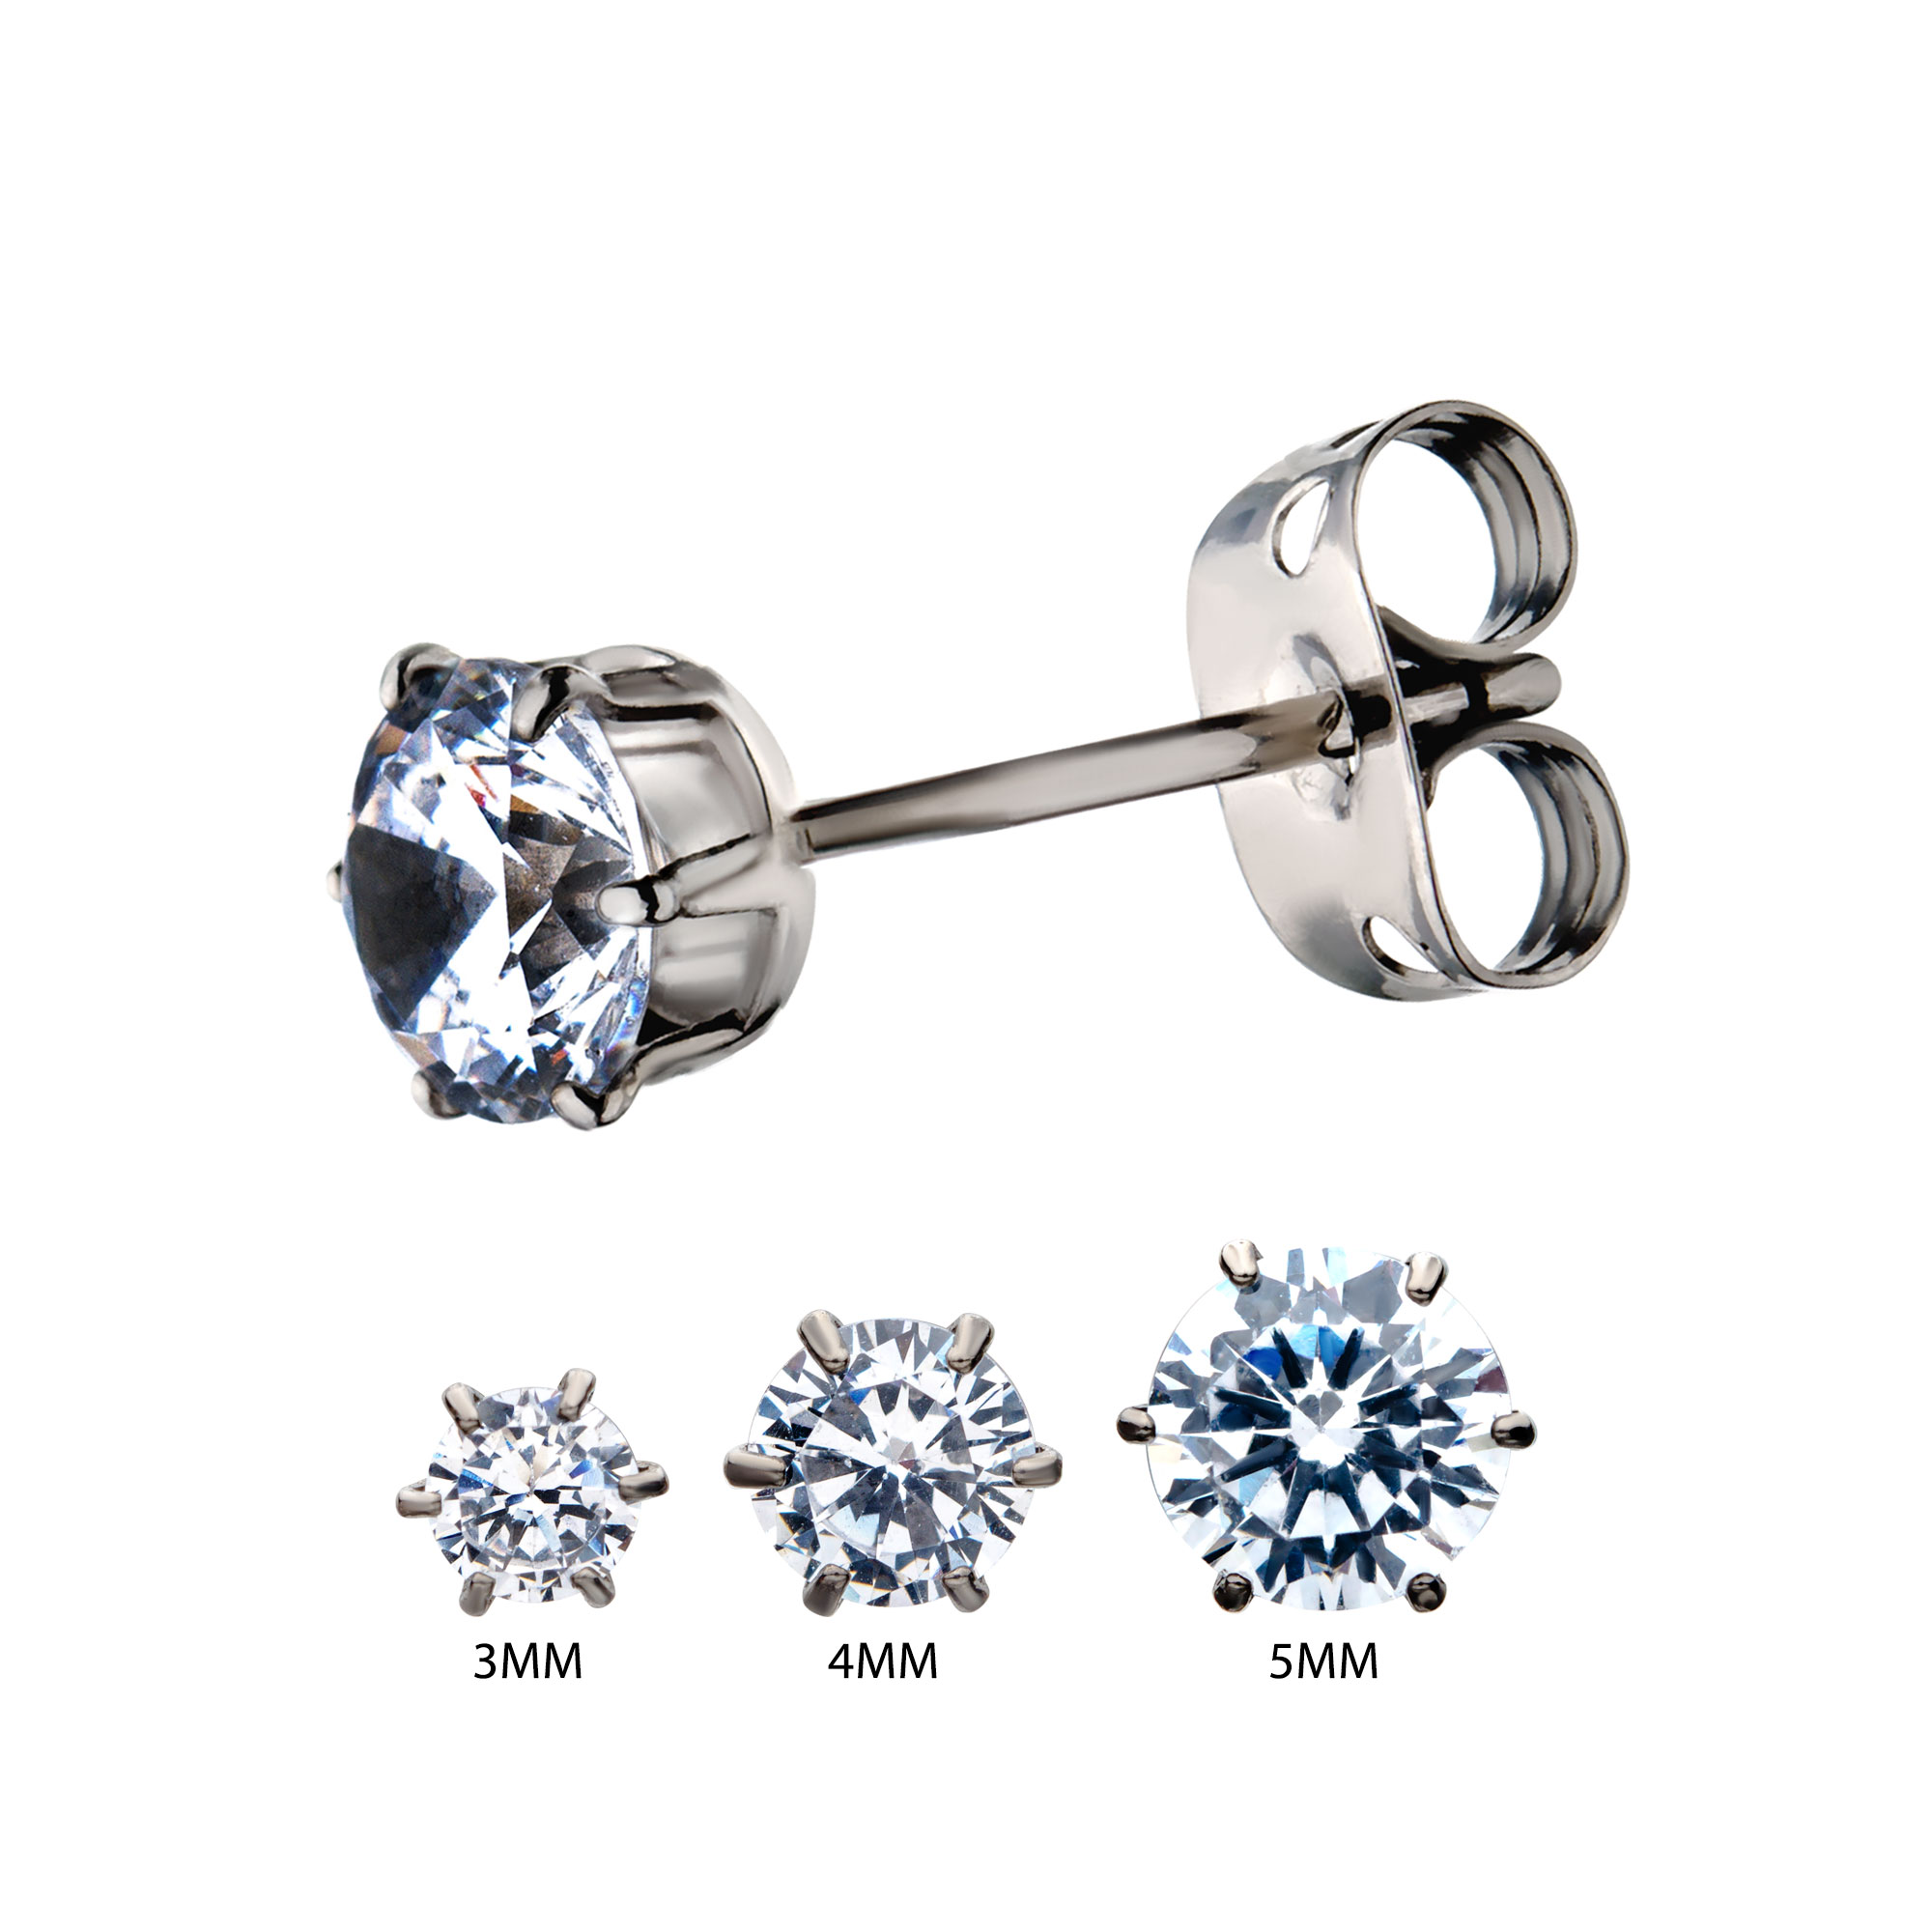 20g Titanium Post and Butterfly Back with Prong Set CZ Stud Earrings Carroll / Ochs Jewelers Monroe, MI